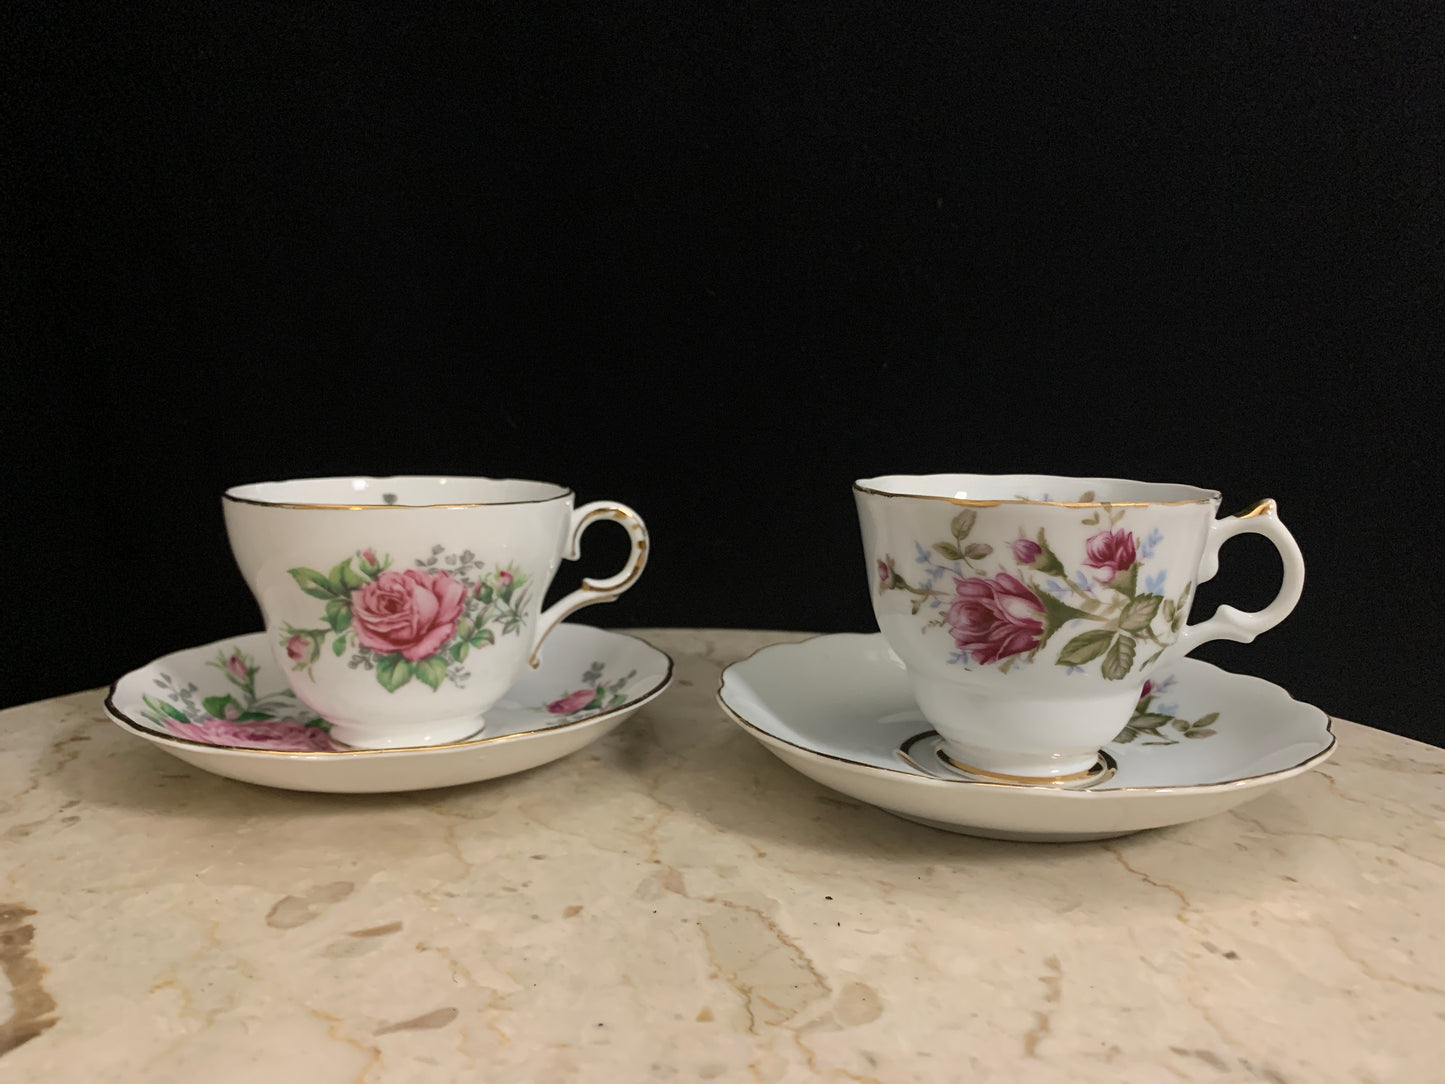 Pair of Mismatched Pink Floral Teacups Tea for Two Teacups with Pink Roses